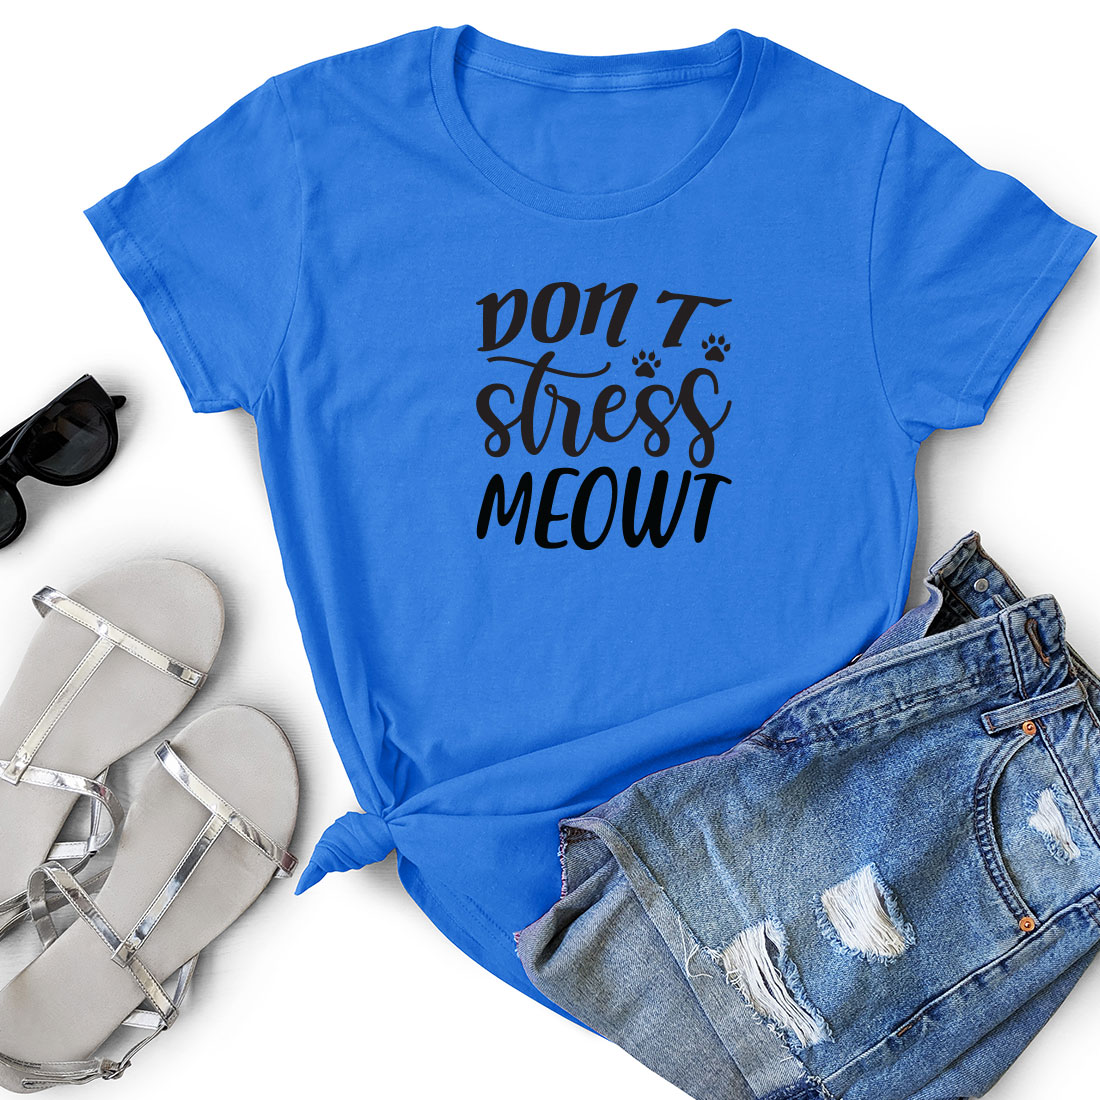 Blue shirt that says don't stress meow.